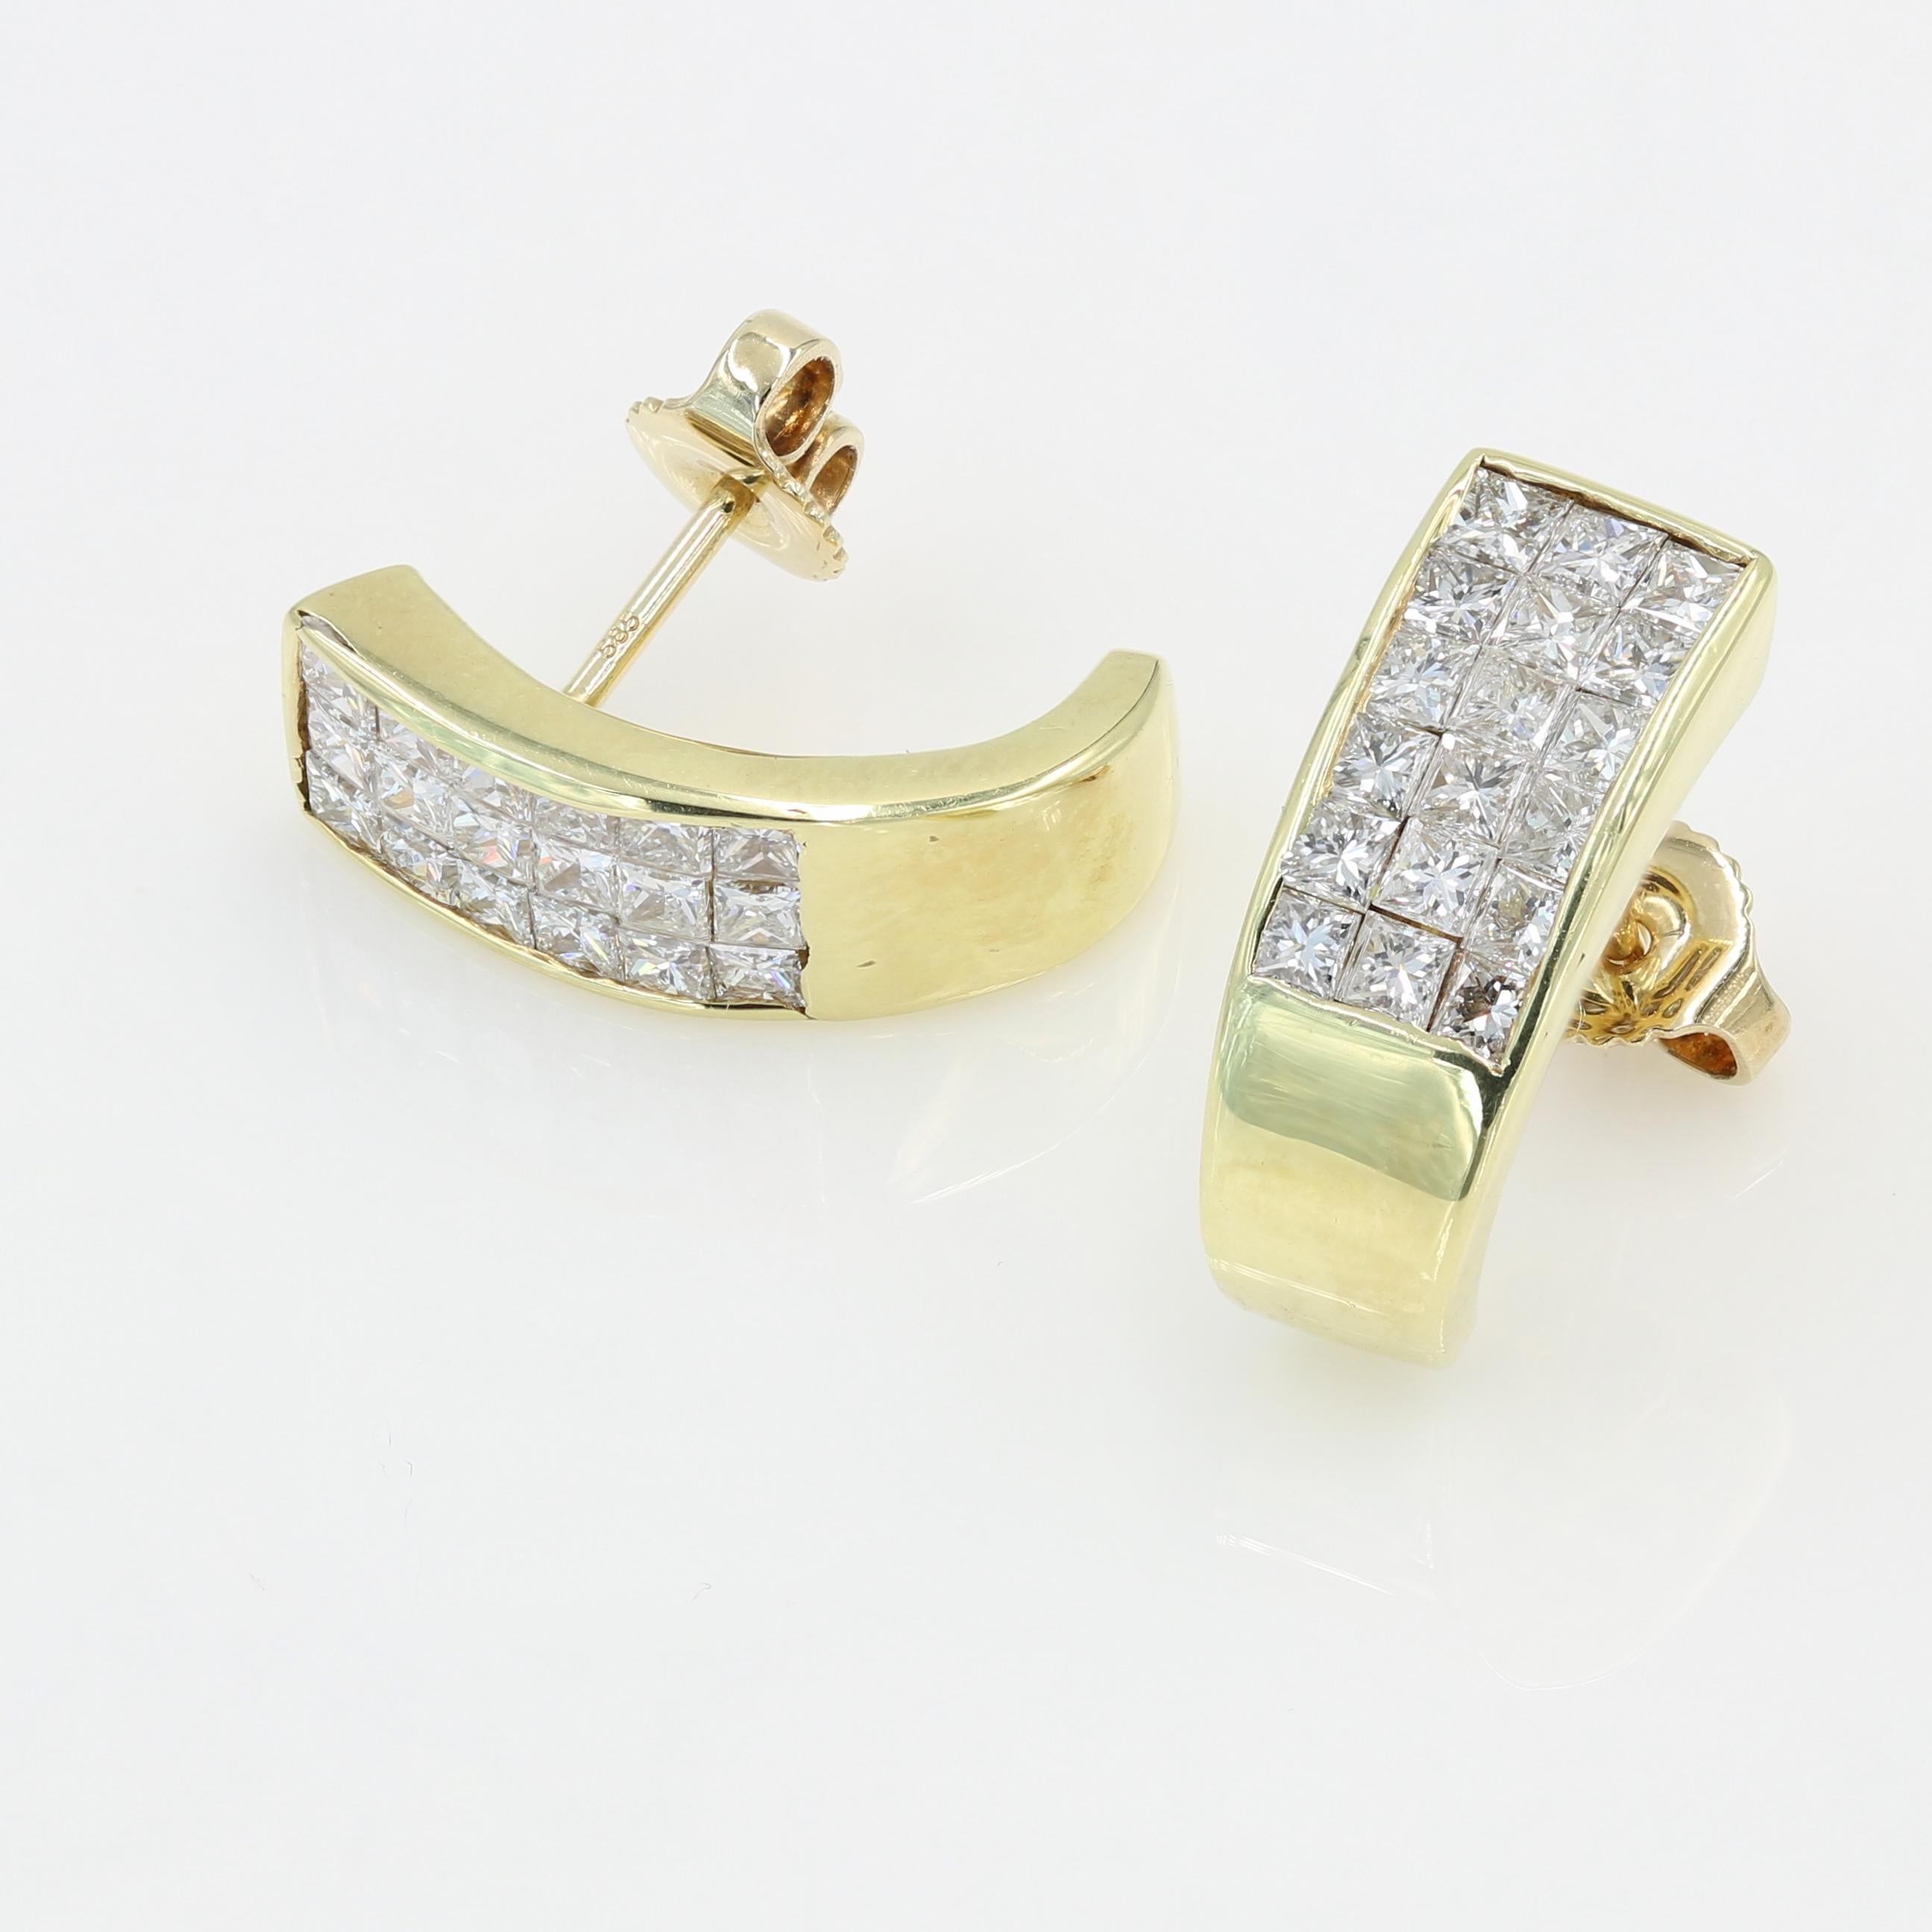 Contemporary Invisible Set Princess Cut Diamond Earrings in 18 Karat Yellow Gold For Sale